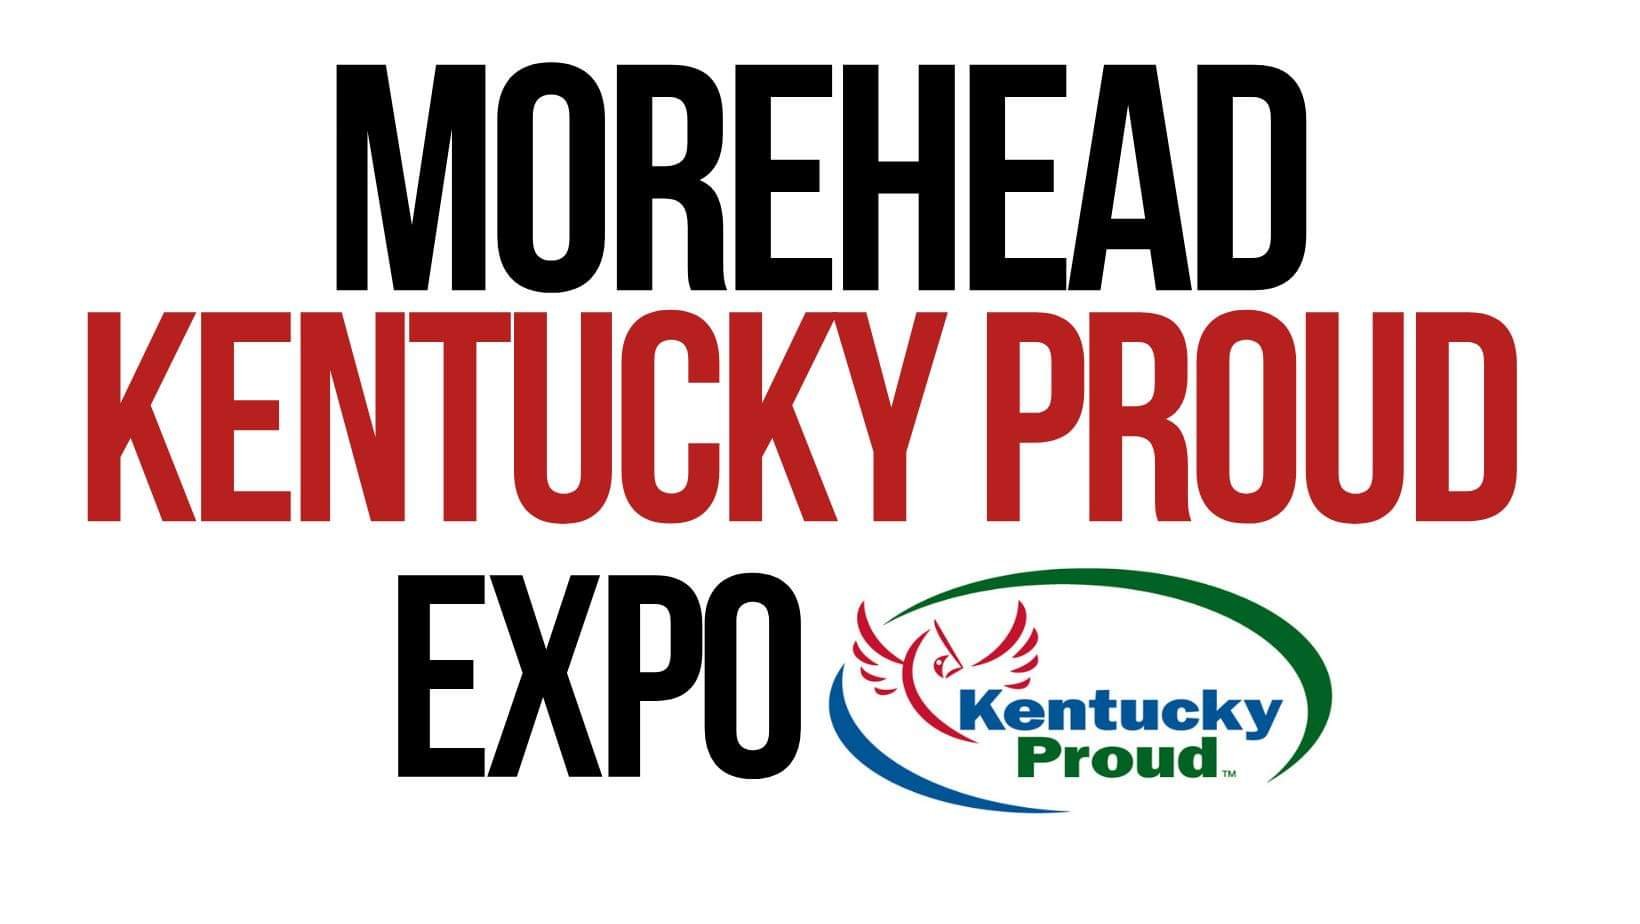 Morehead KY Proud Expo